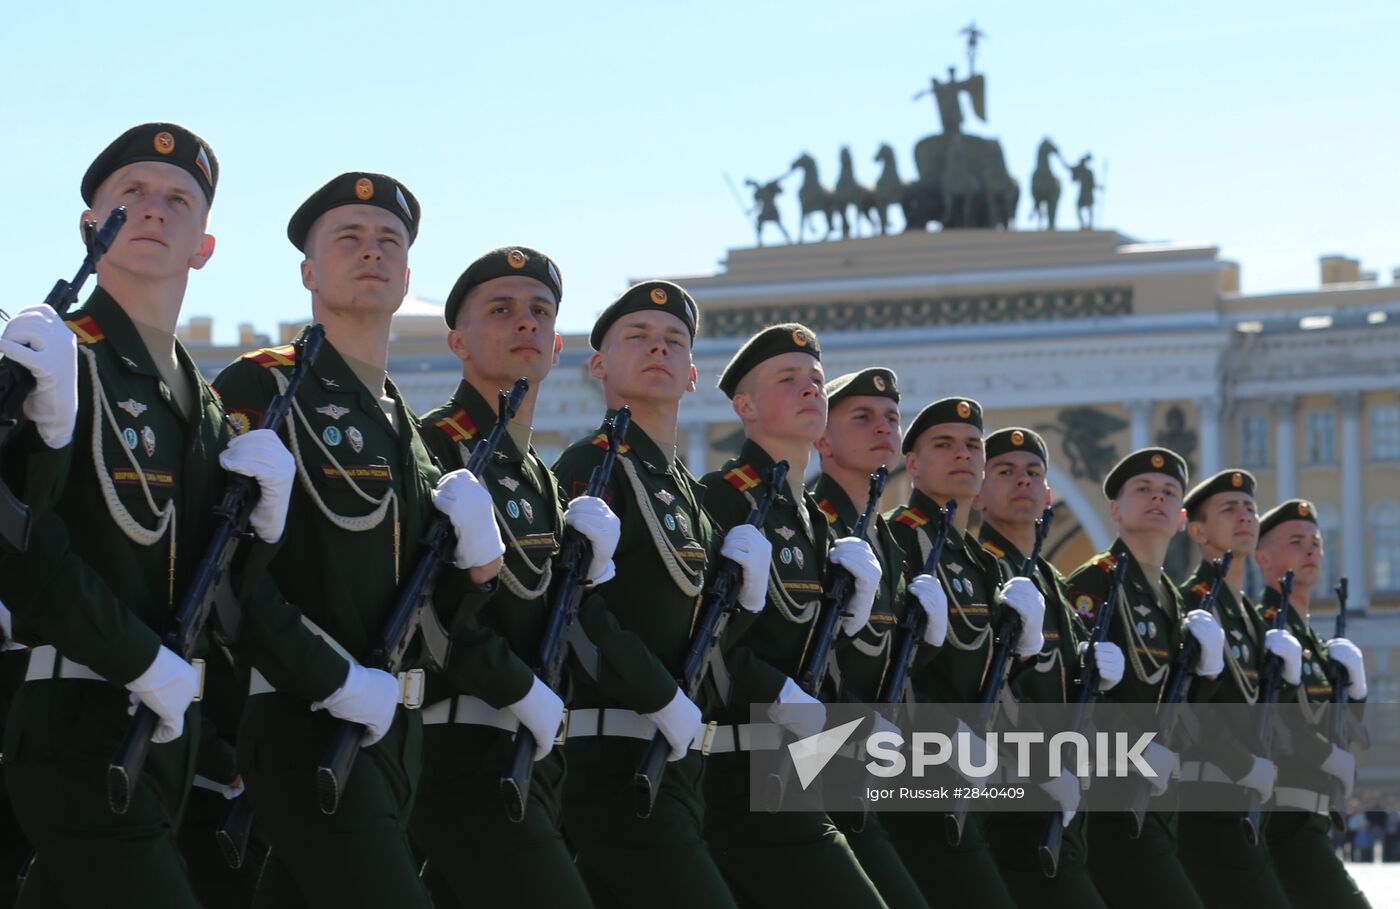 Final practice of Victory parade in Russian cities